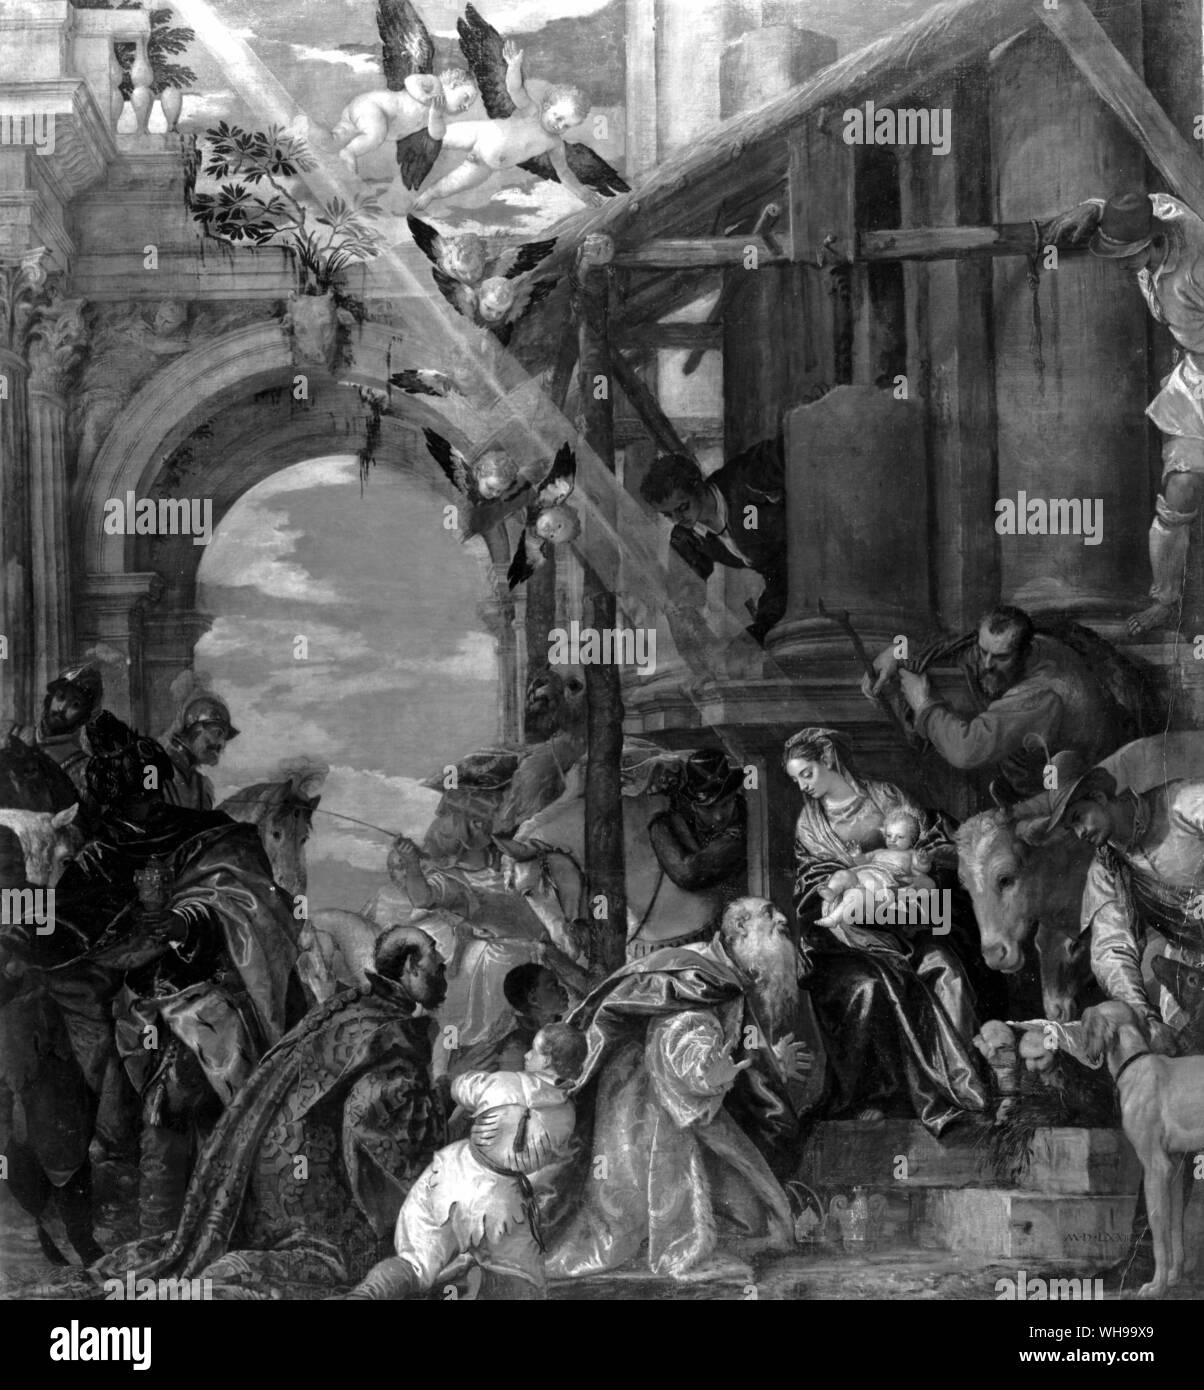 Detail of an Adoration by Veronese showing one of the Three Kings in a Venetian silk cloak. Stock Photo